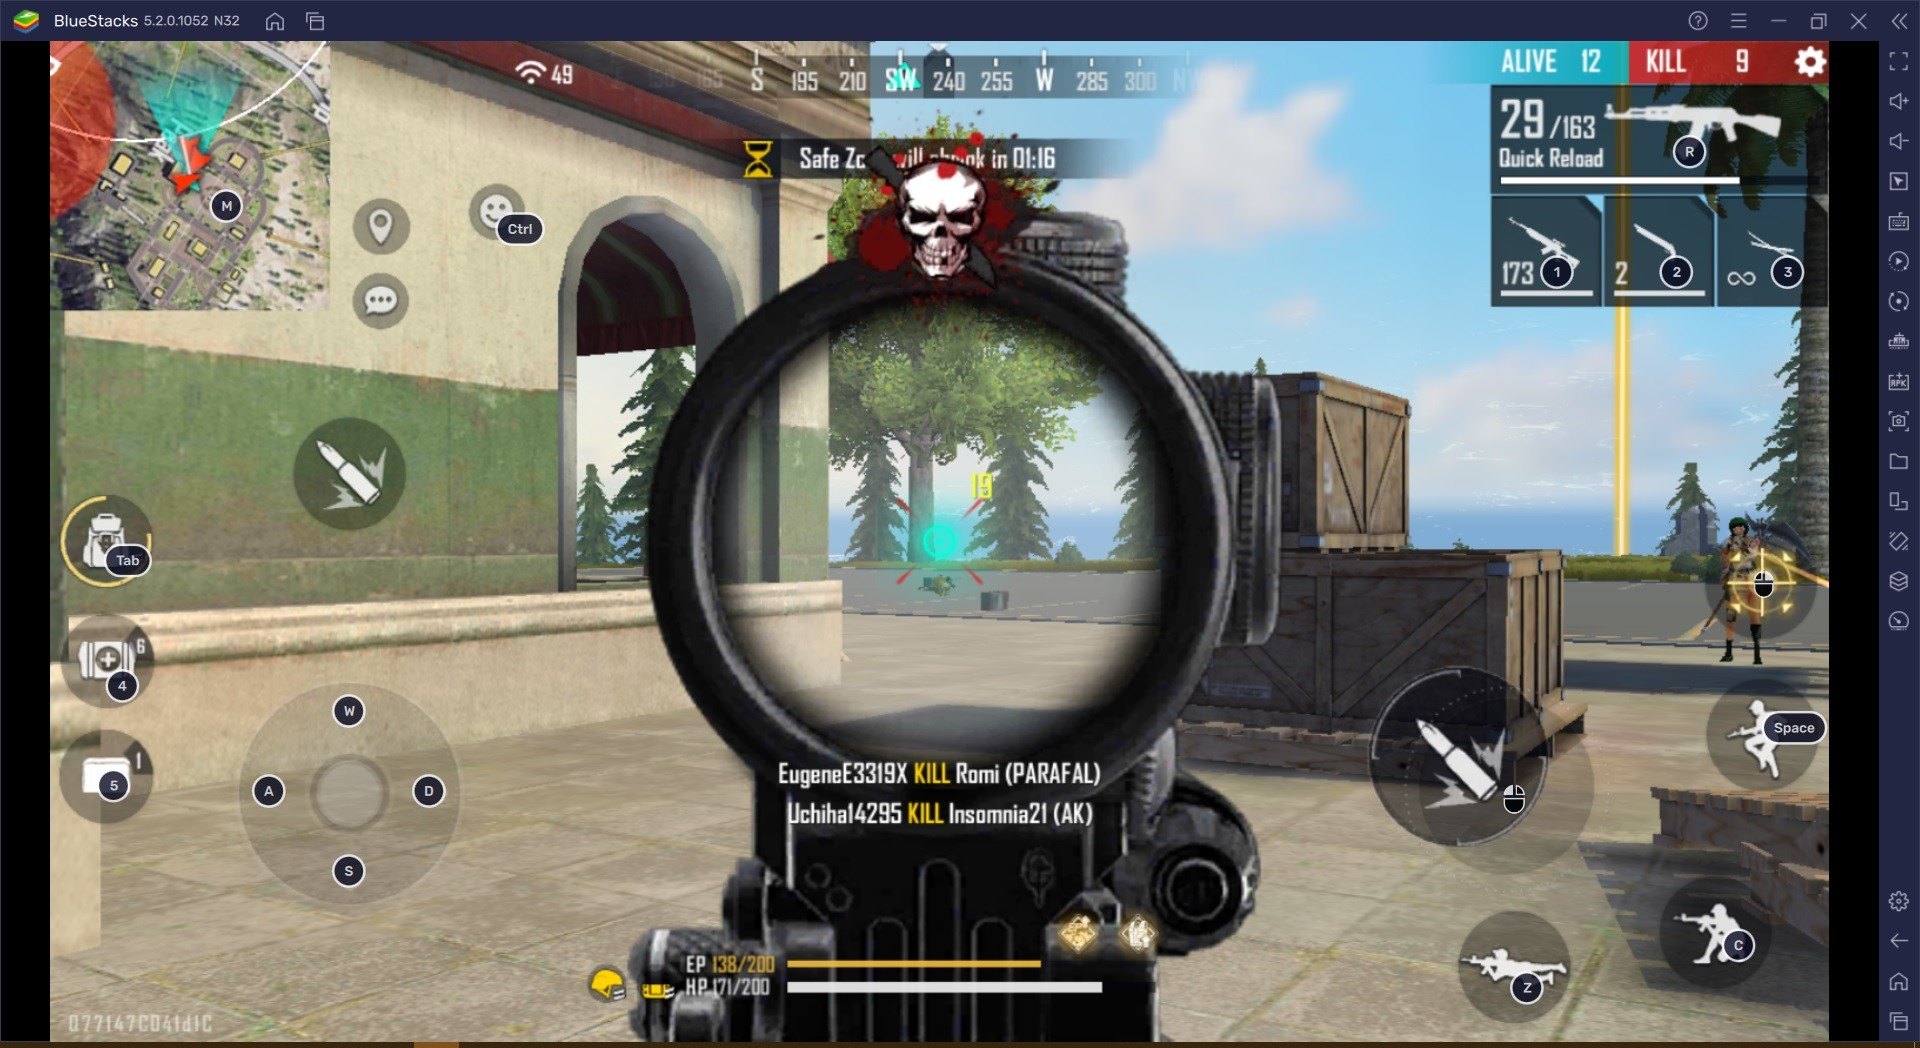 Free Fire Guide to Ranked Games: Learn How to Dominate the BR